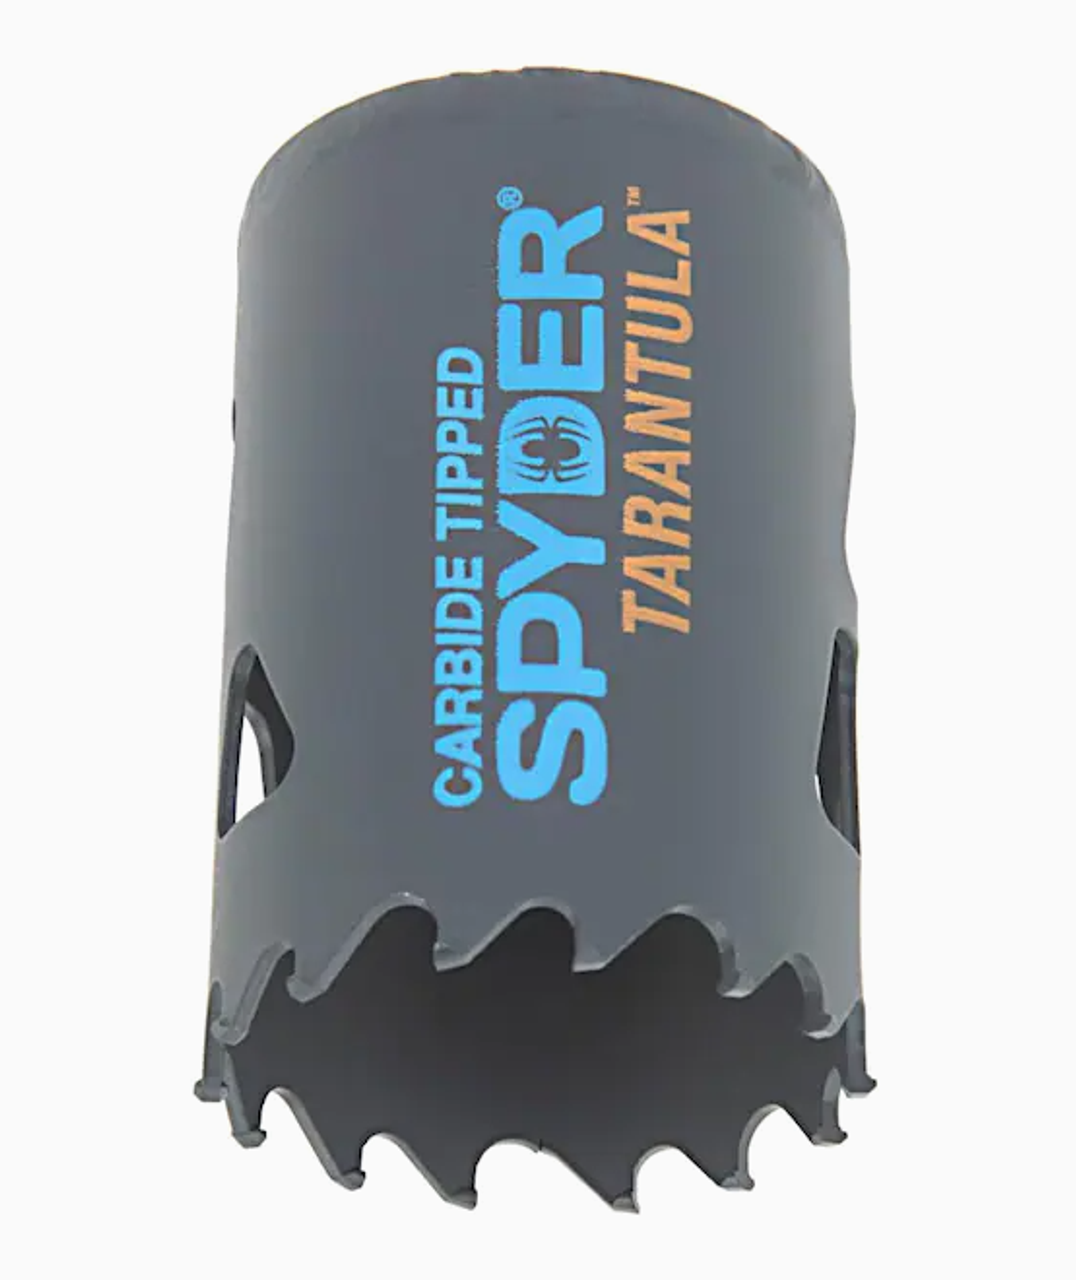 Spyder Tarantula (600904) 1 7/8" Inch 48mm Hole Saw Tungsten Carbide-Tipped Non-Arbored Hex 10 for Steel, Wood, Plastics